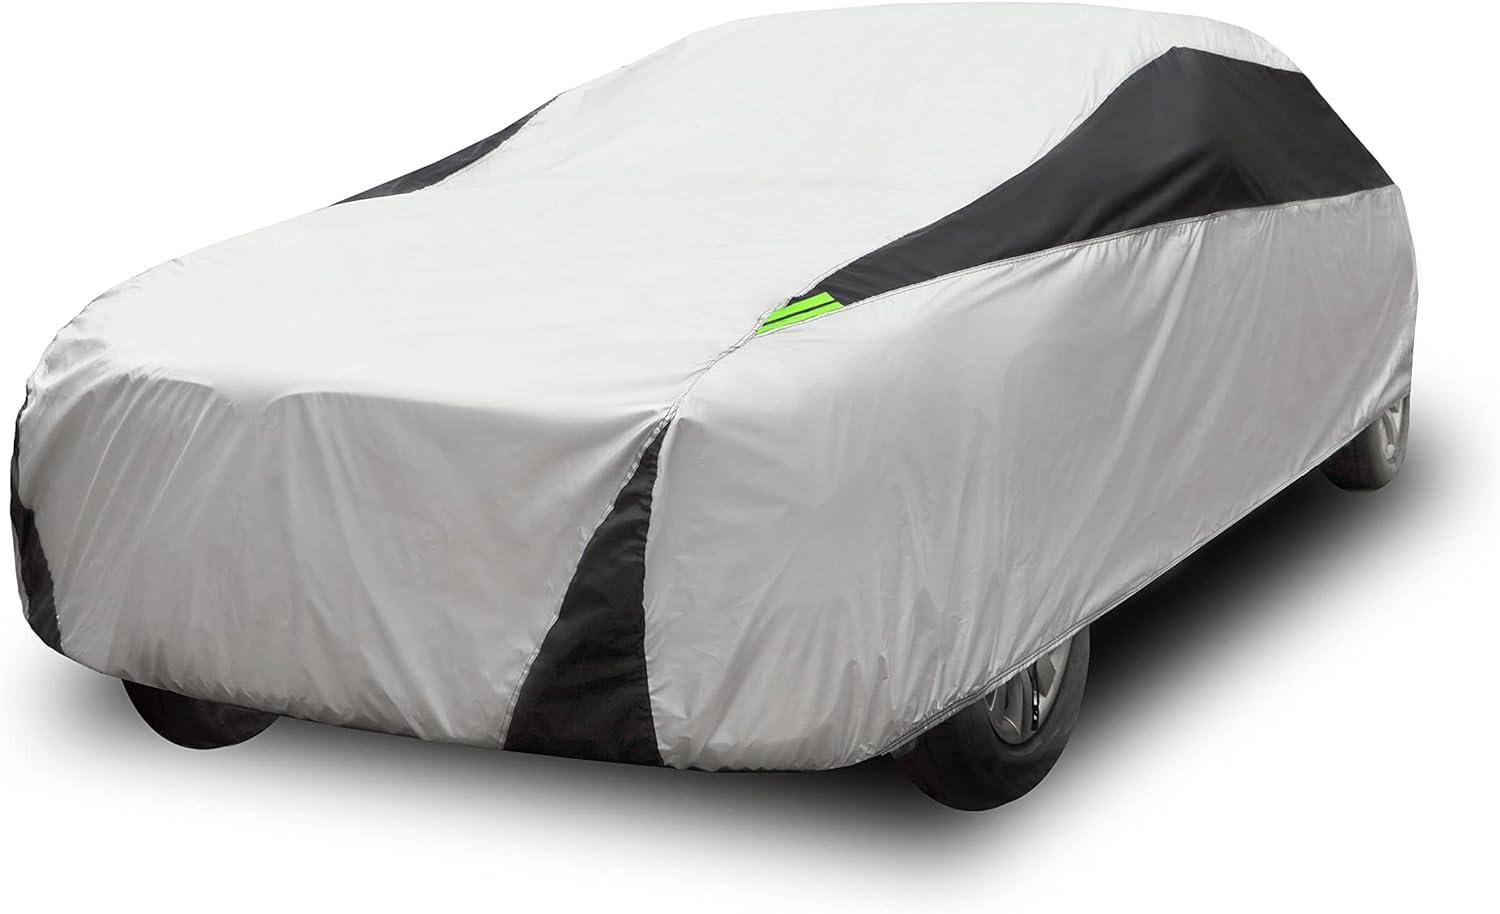 dropshipping products - Car covers